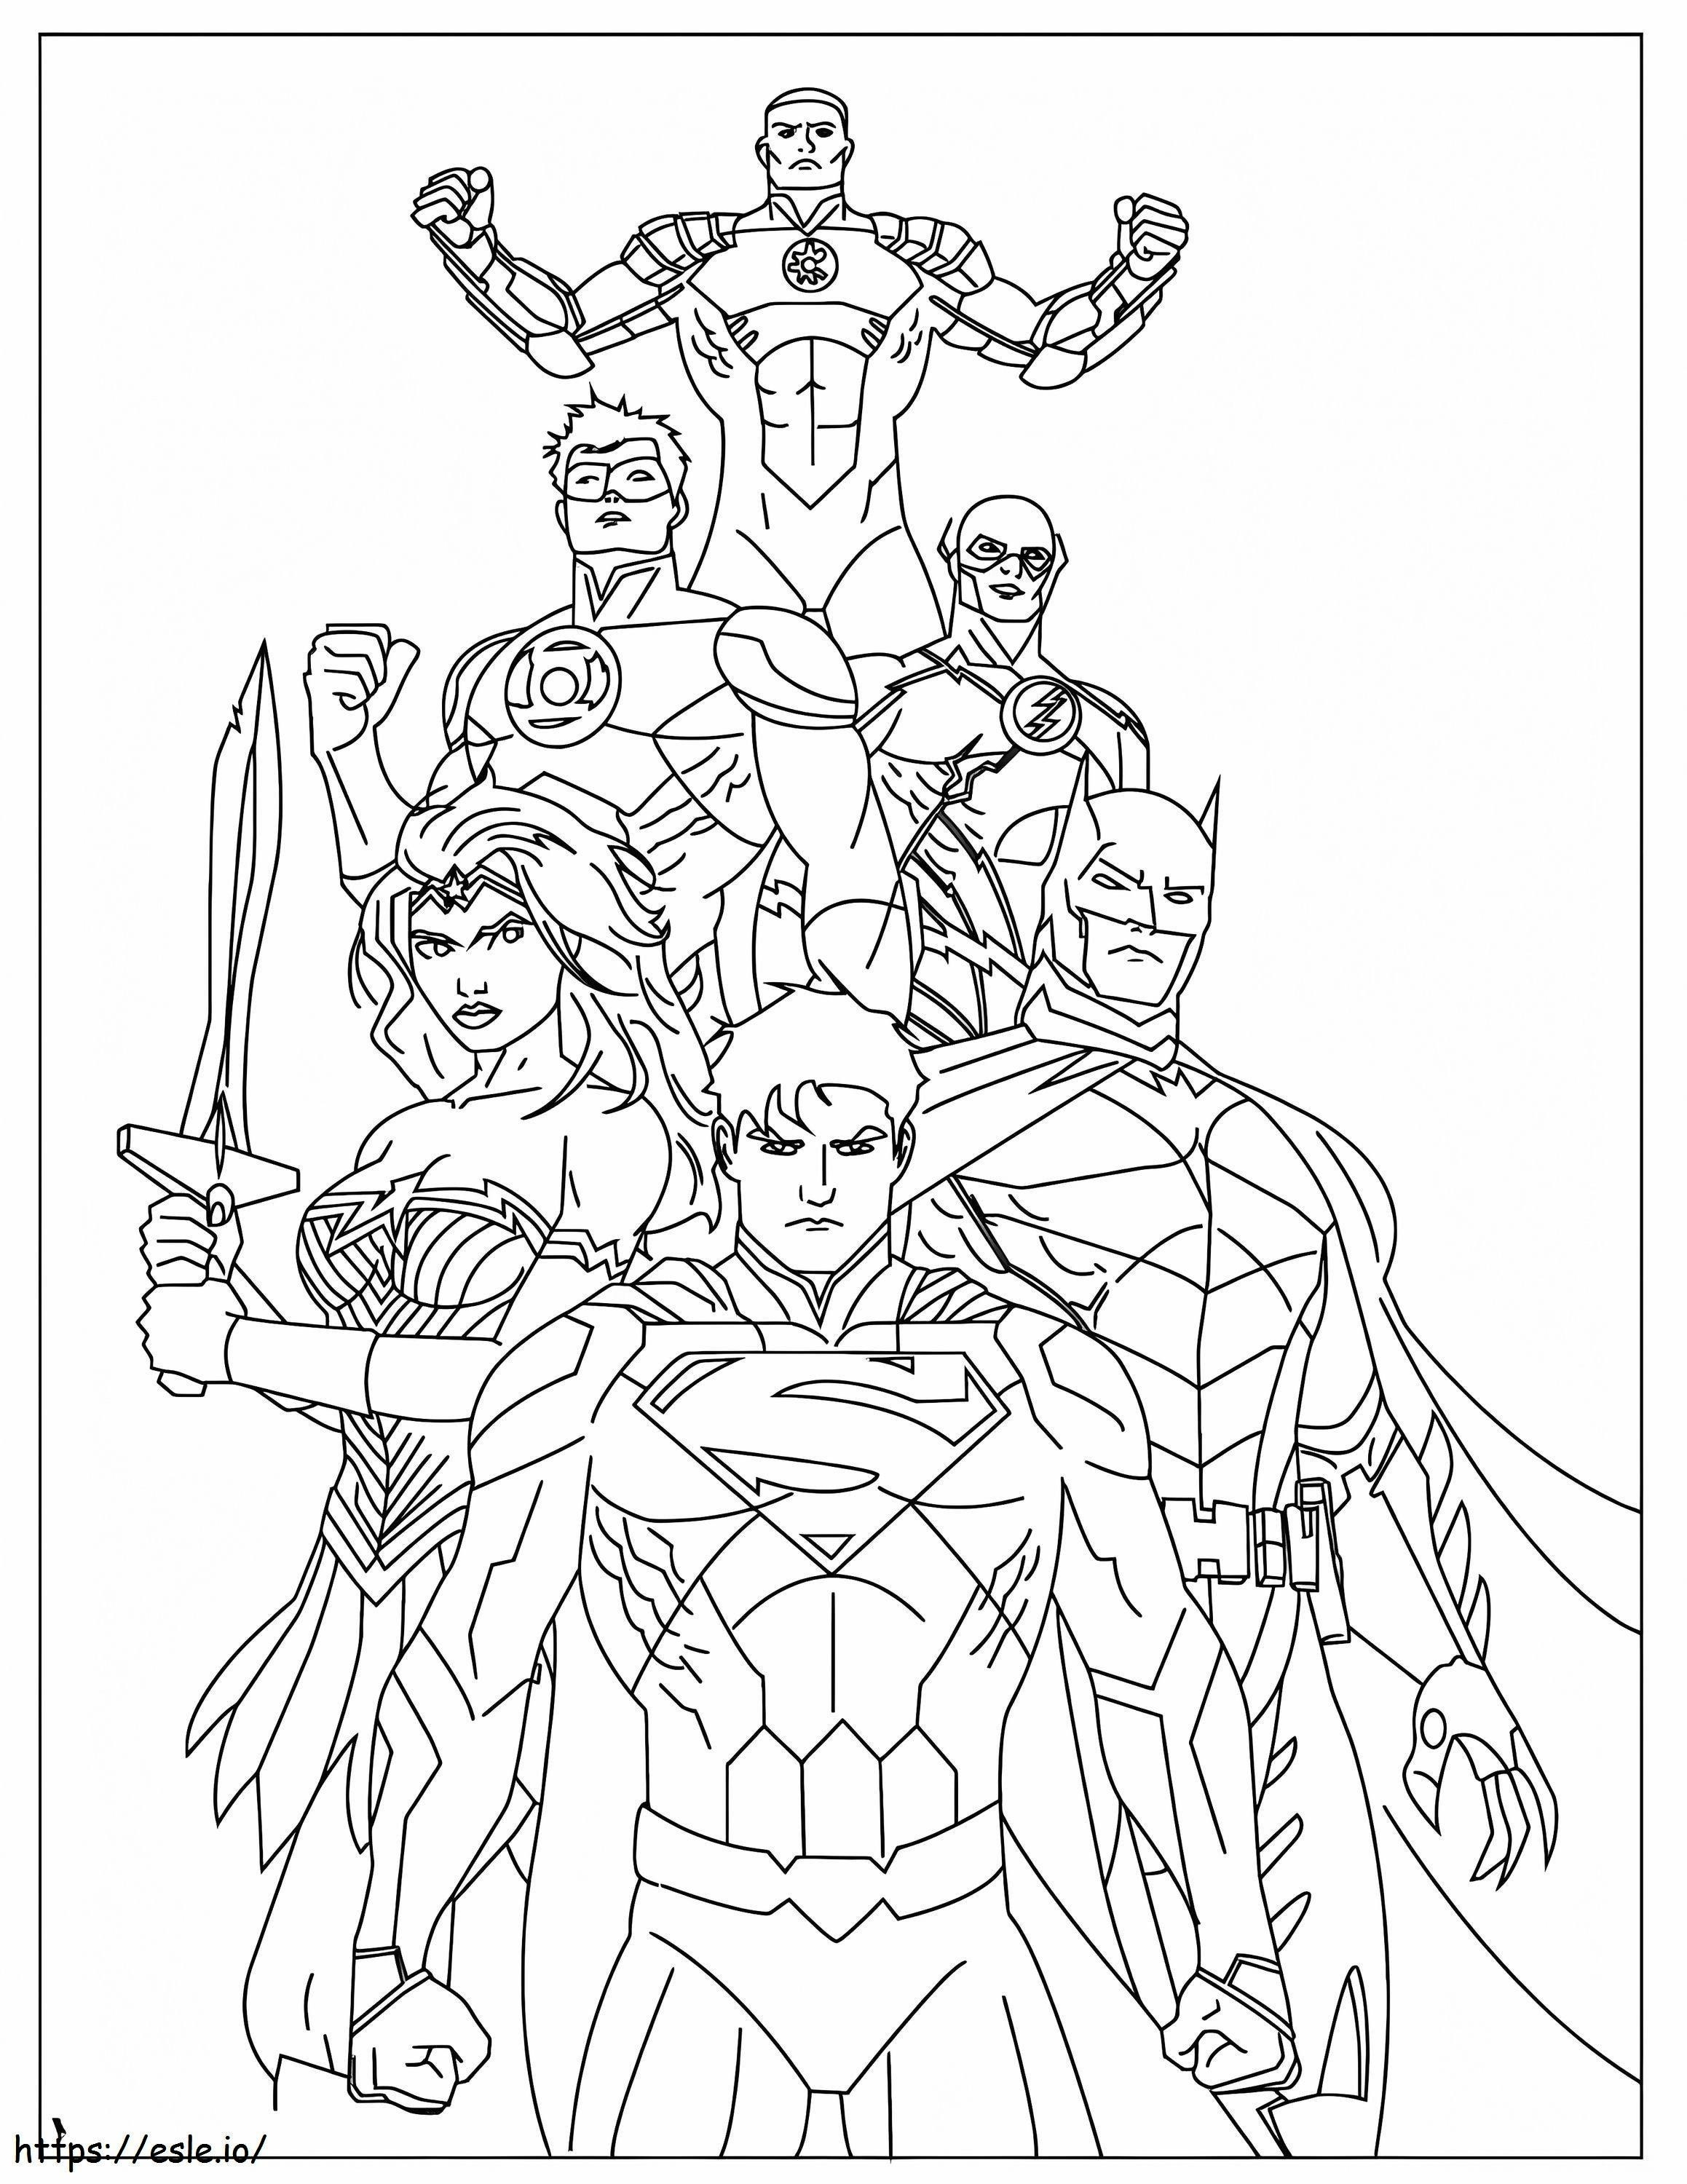 Superman And Friends coloring page